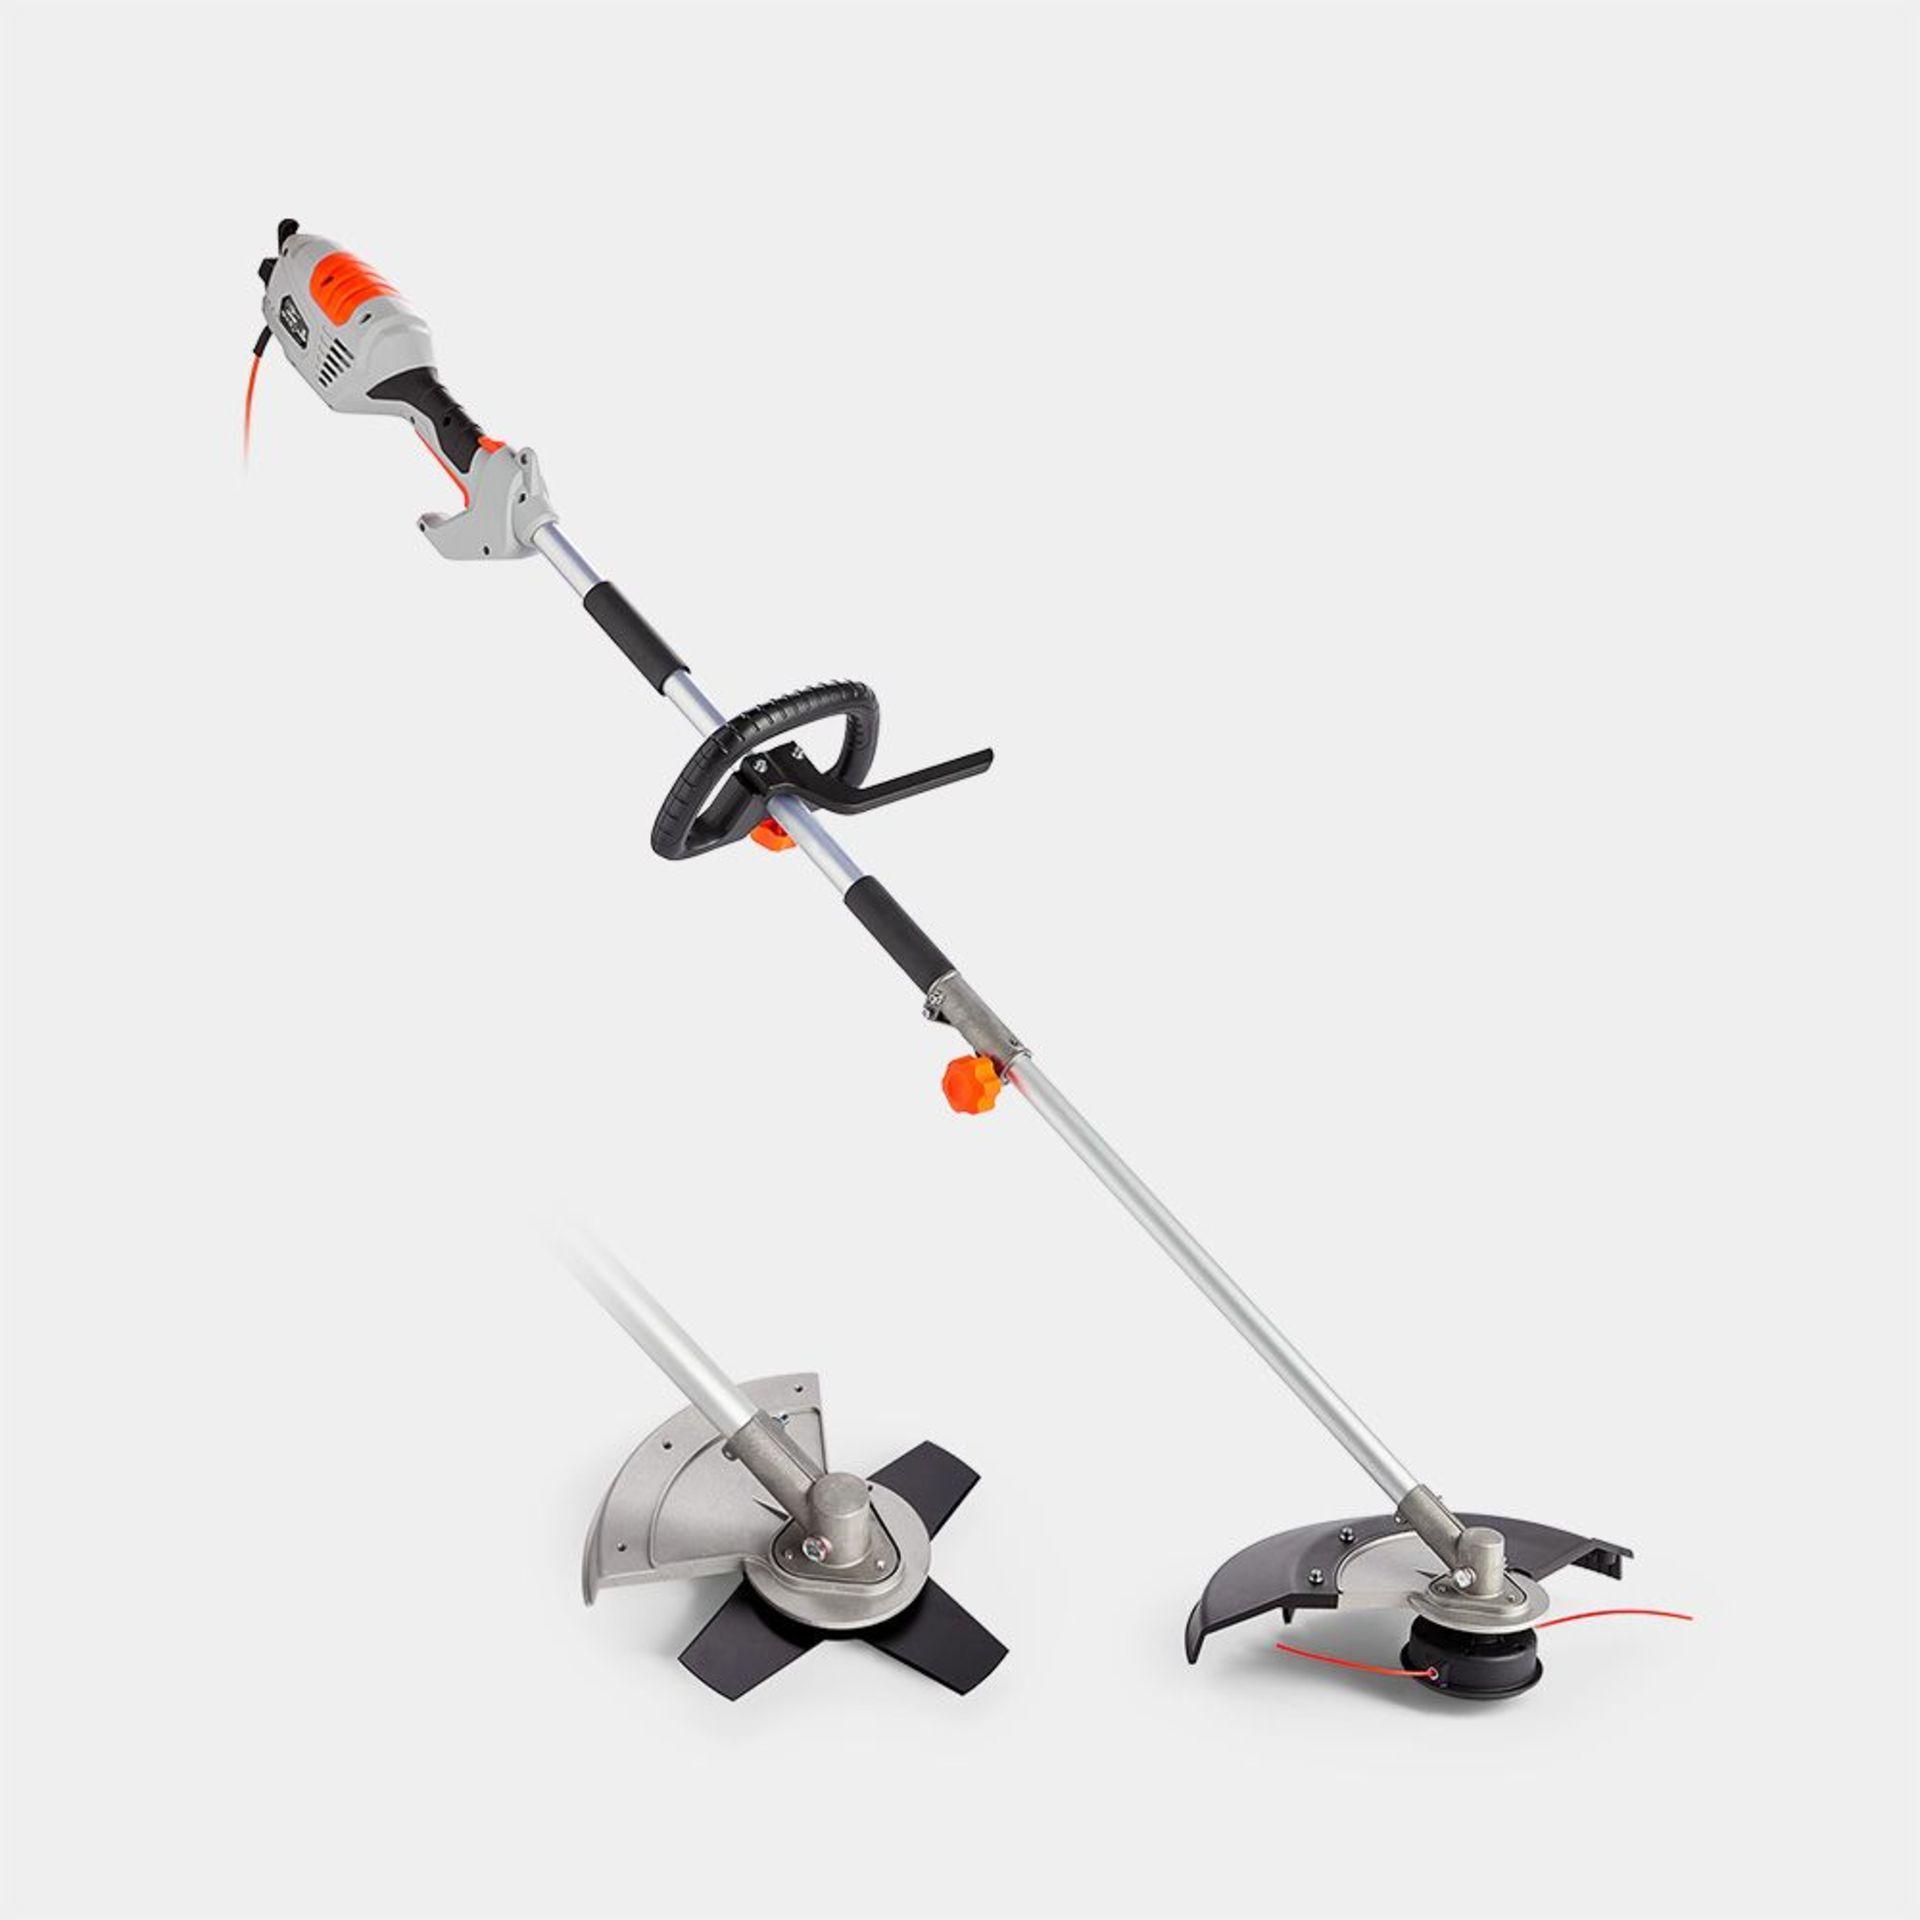 Grass Trimmer & Brush Cutter. - R8. This 2-in-1 tool includes a grass trimmer for neatening edges